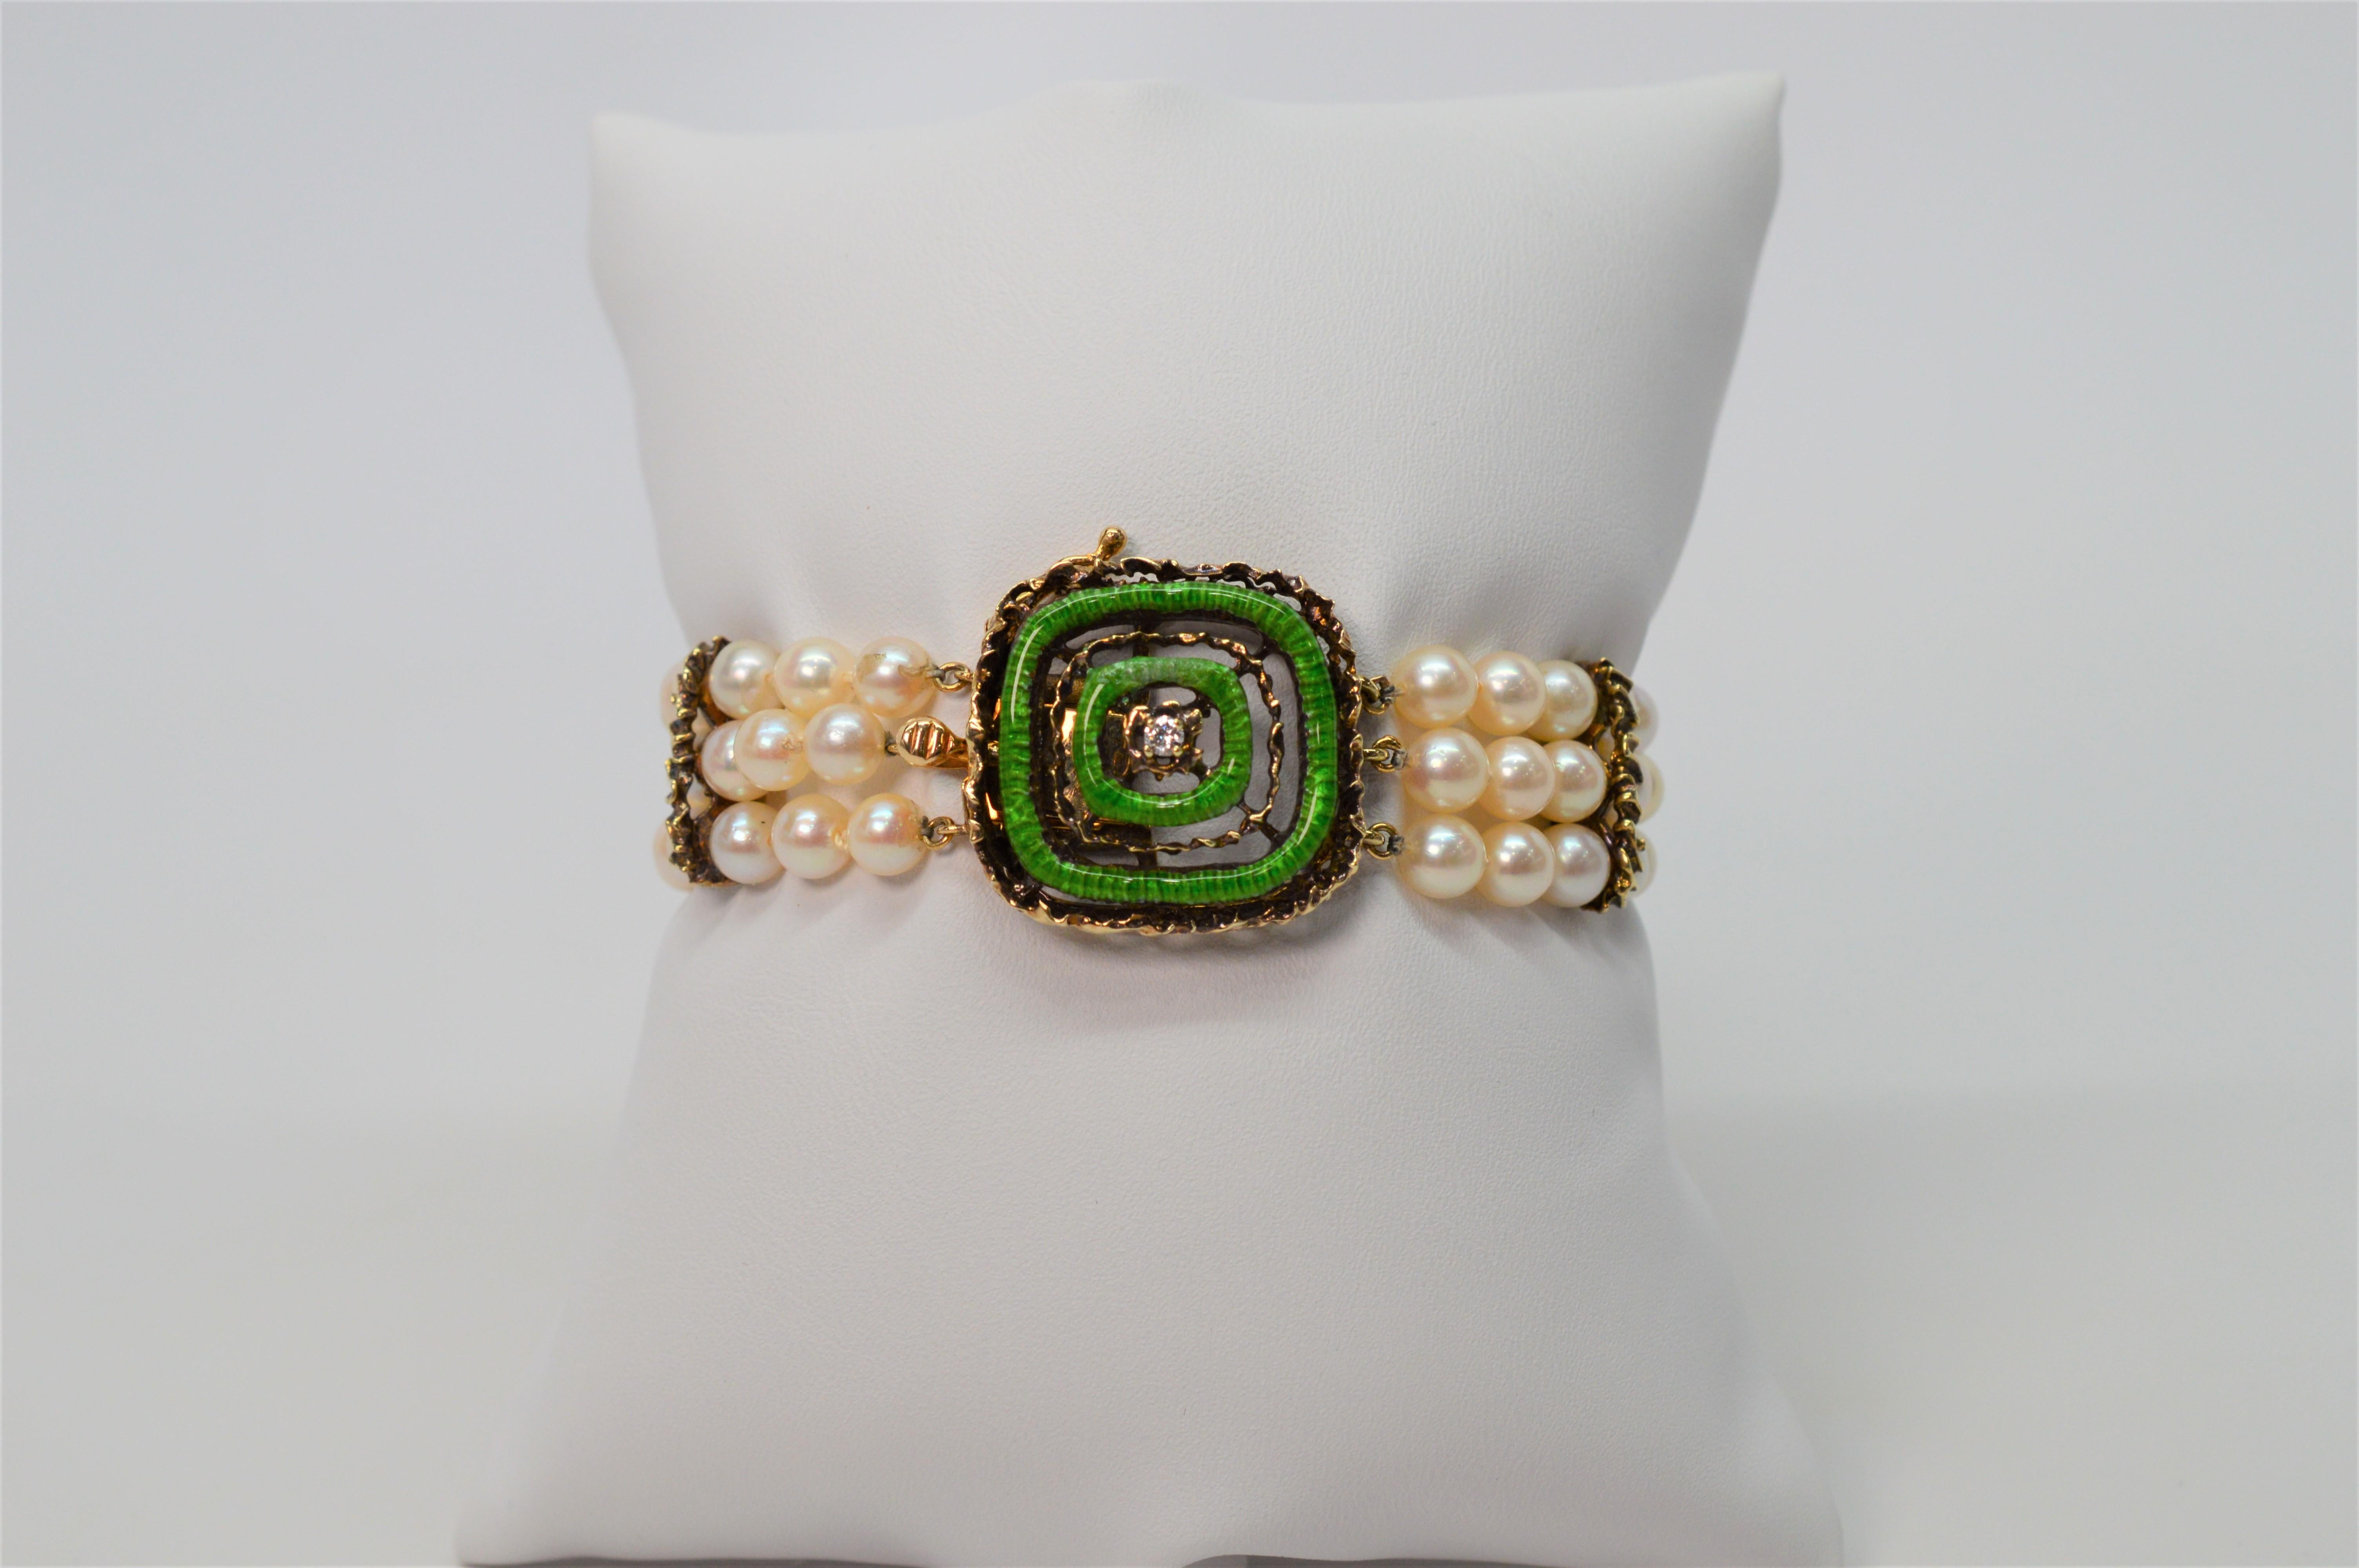 Whimsical in nature, this triple strand bracelet  is an eclectic mix of classic AAA Akoya Pearls with rustic 14 Karat Yellow Gold accents featuring an unusual fine Green Enamel 14 Karat Charm with a Diamond center that doubles as the clasp.  Seven